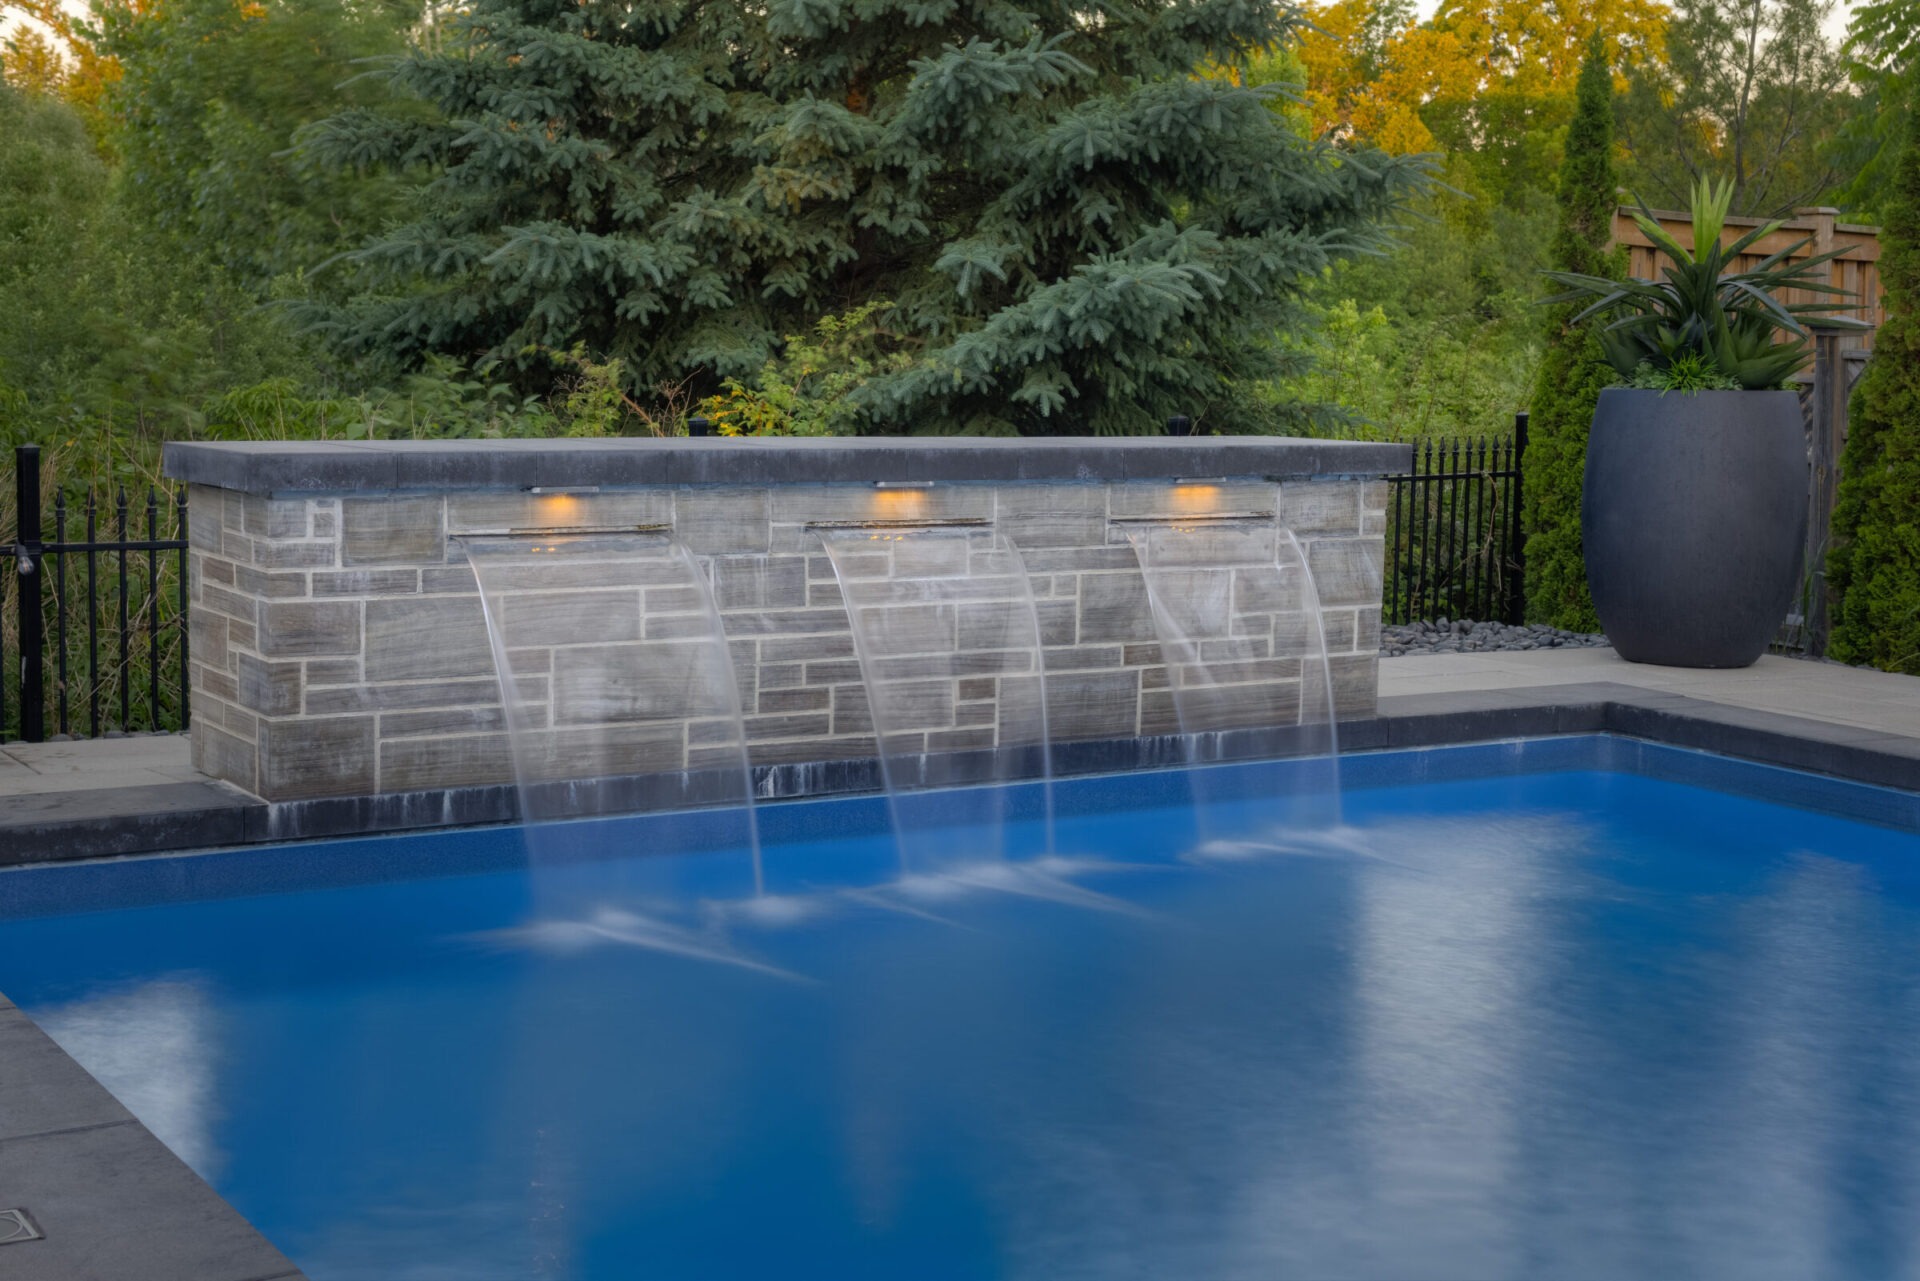 An outdoor swimming pool with a stone wall featuring water cascades, surrounded by lush greenery and a large decorative pot, at dusk.